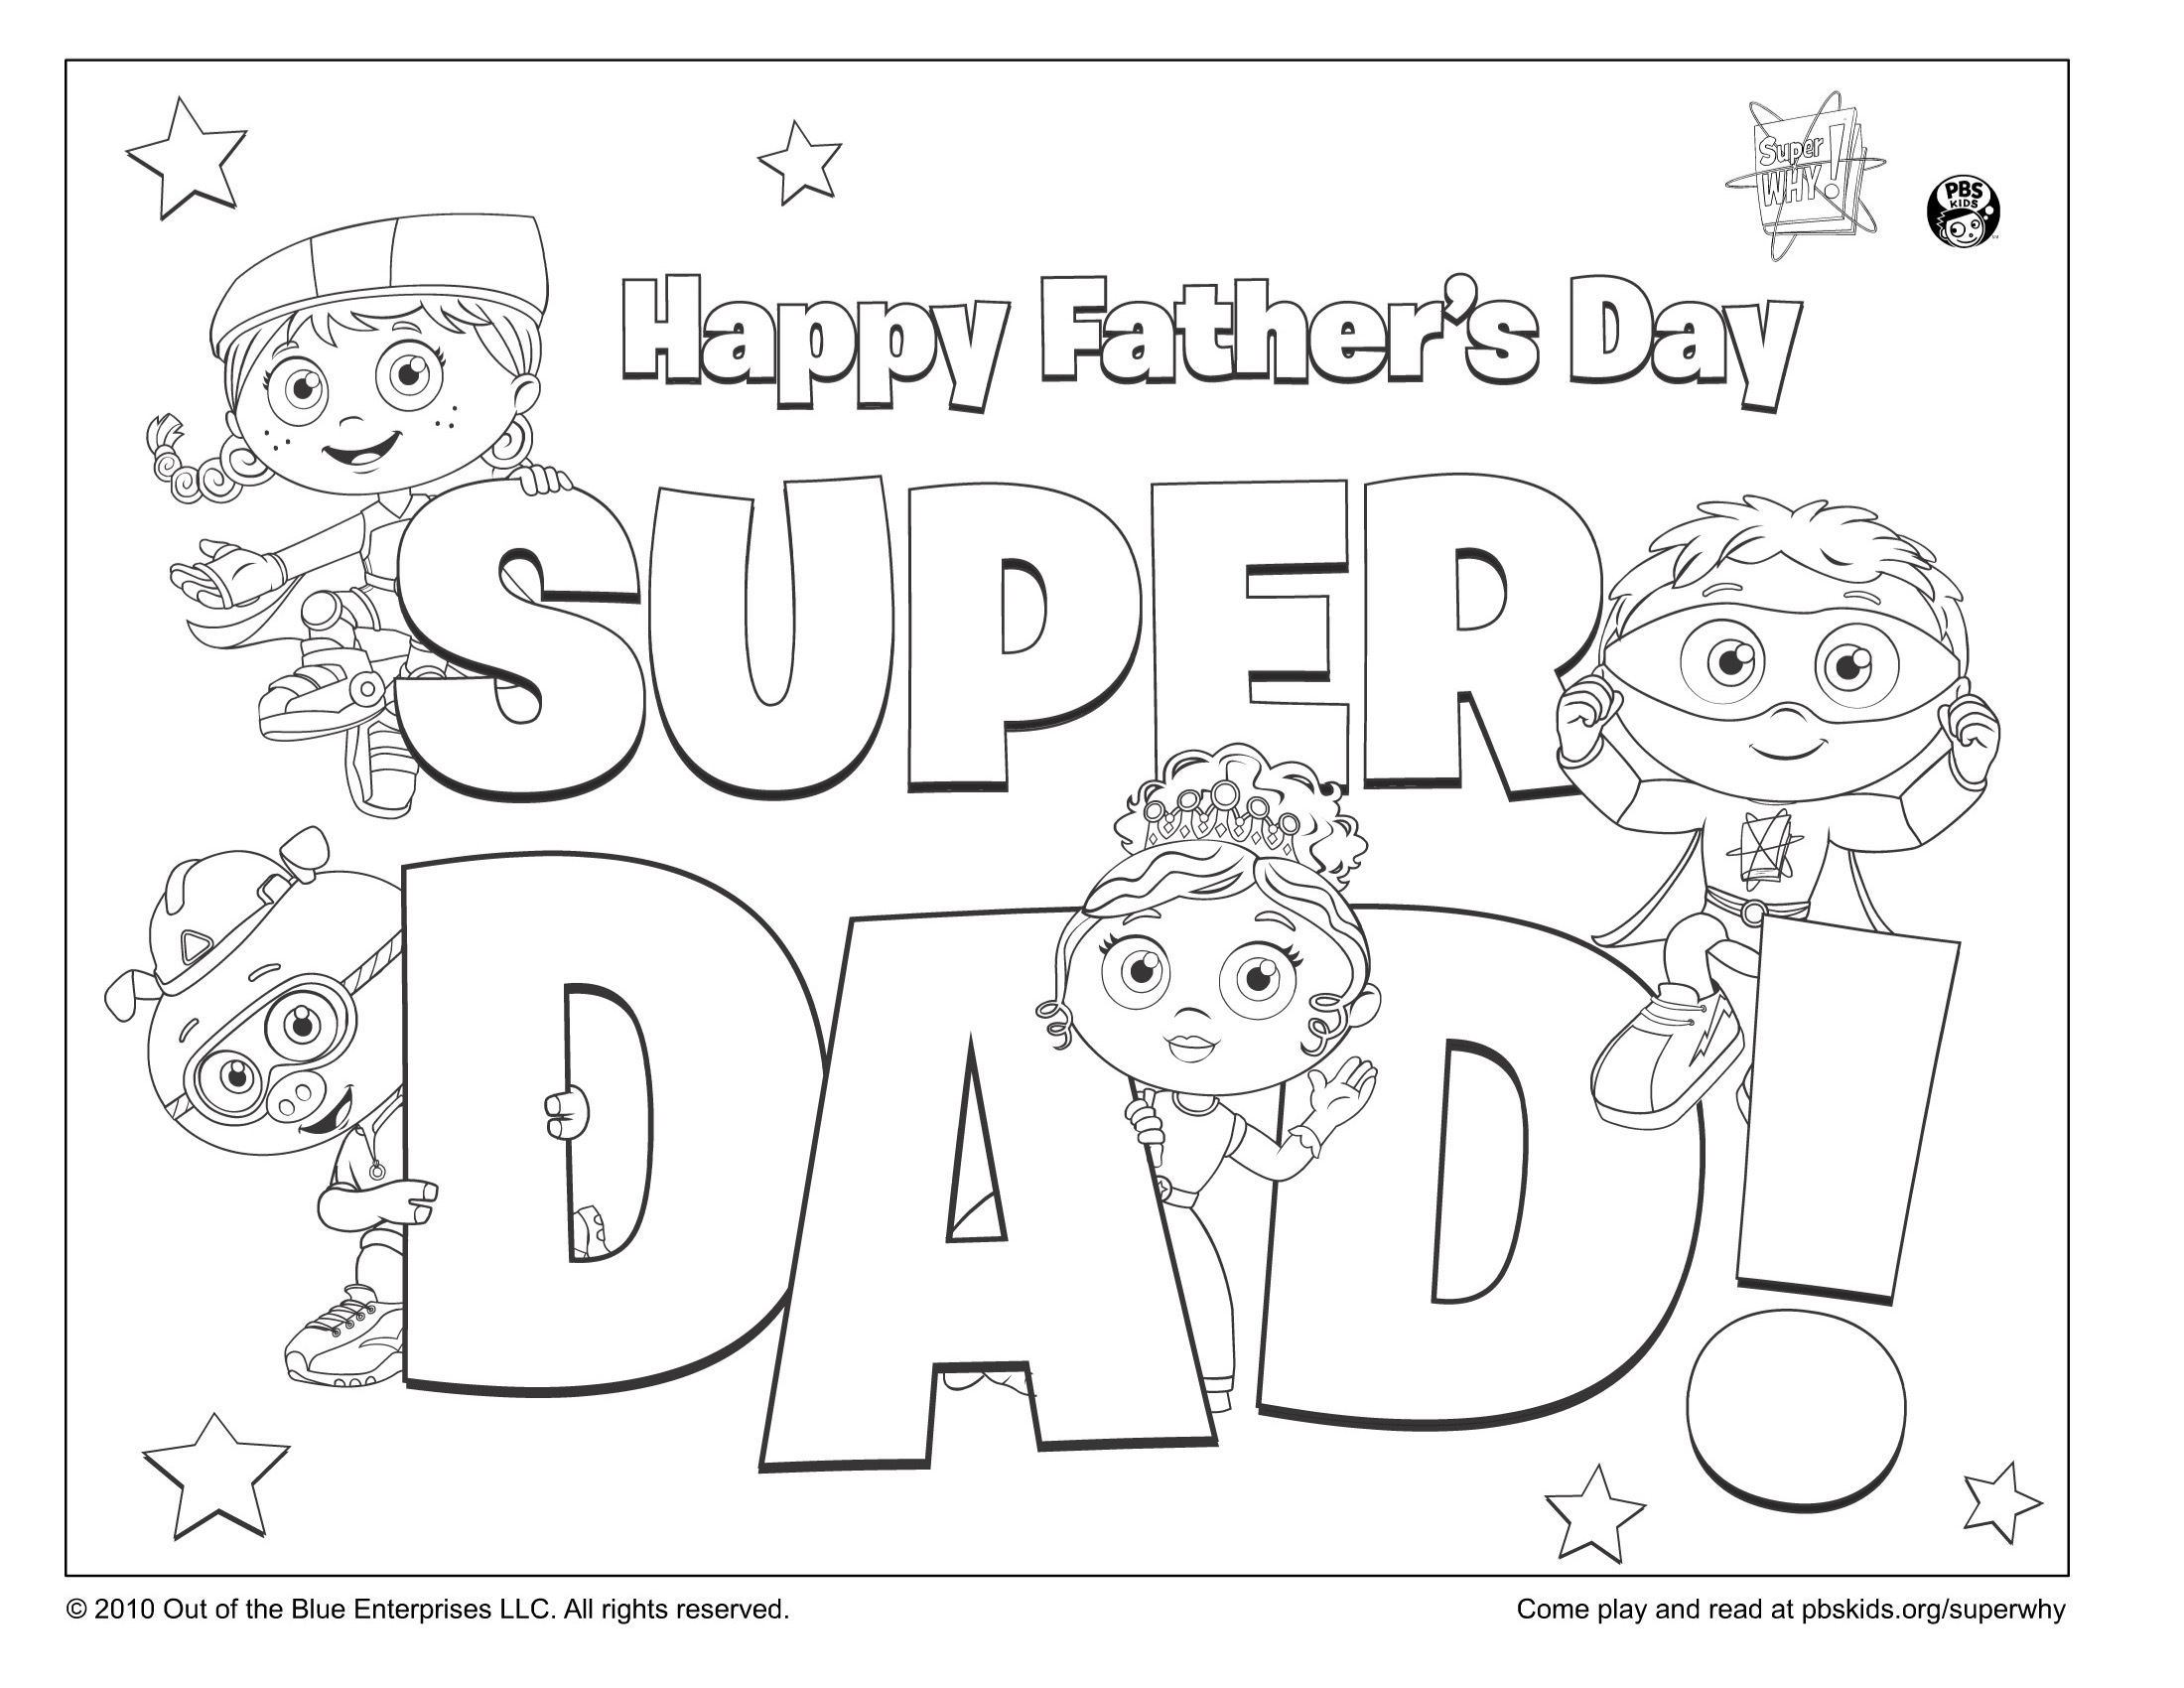 Super dad coloring page kids coloring pages kids for parents